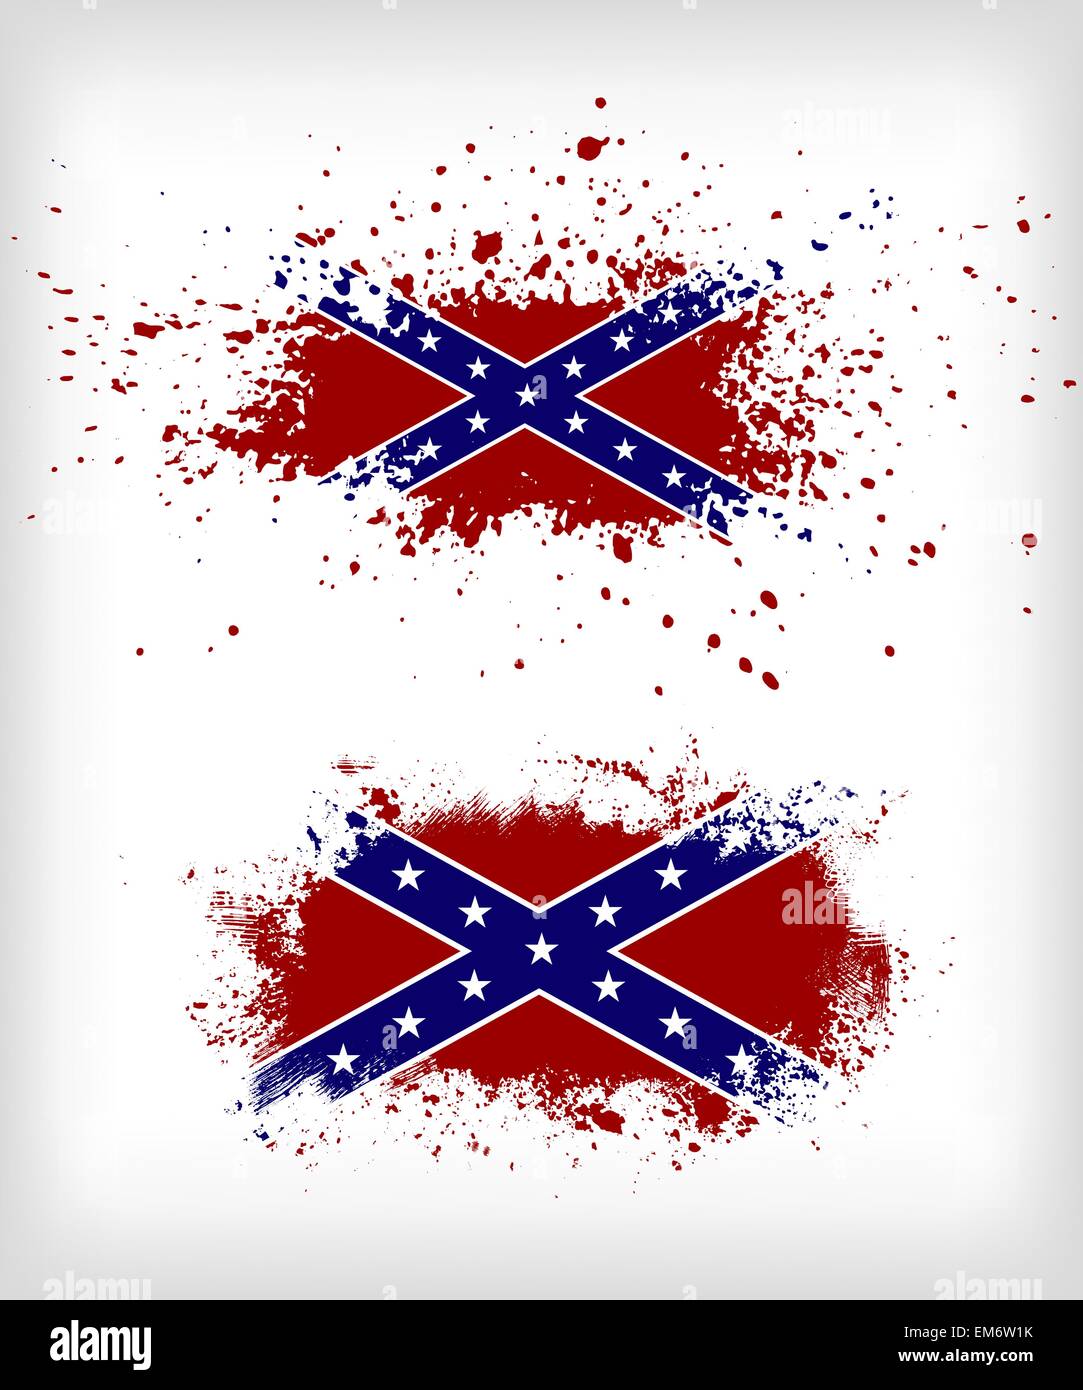 Grunge confederate flags vector set Stock Vector